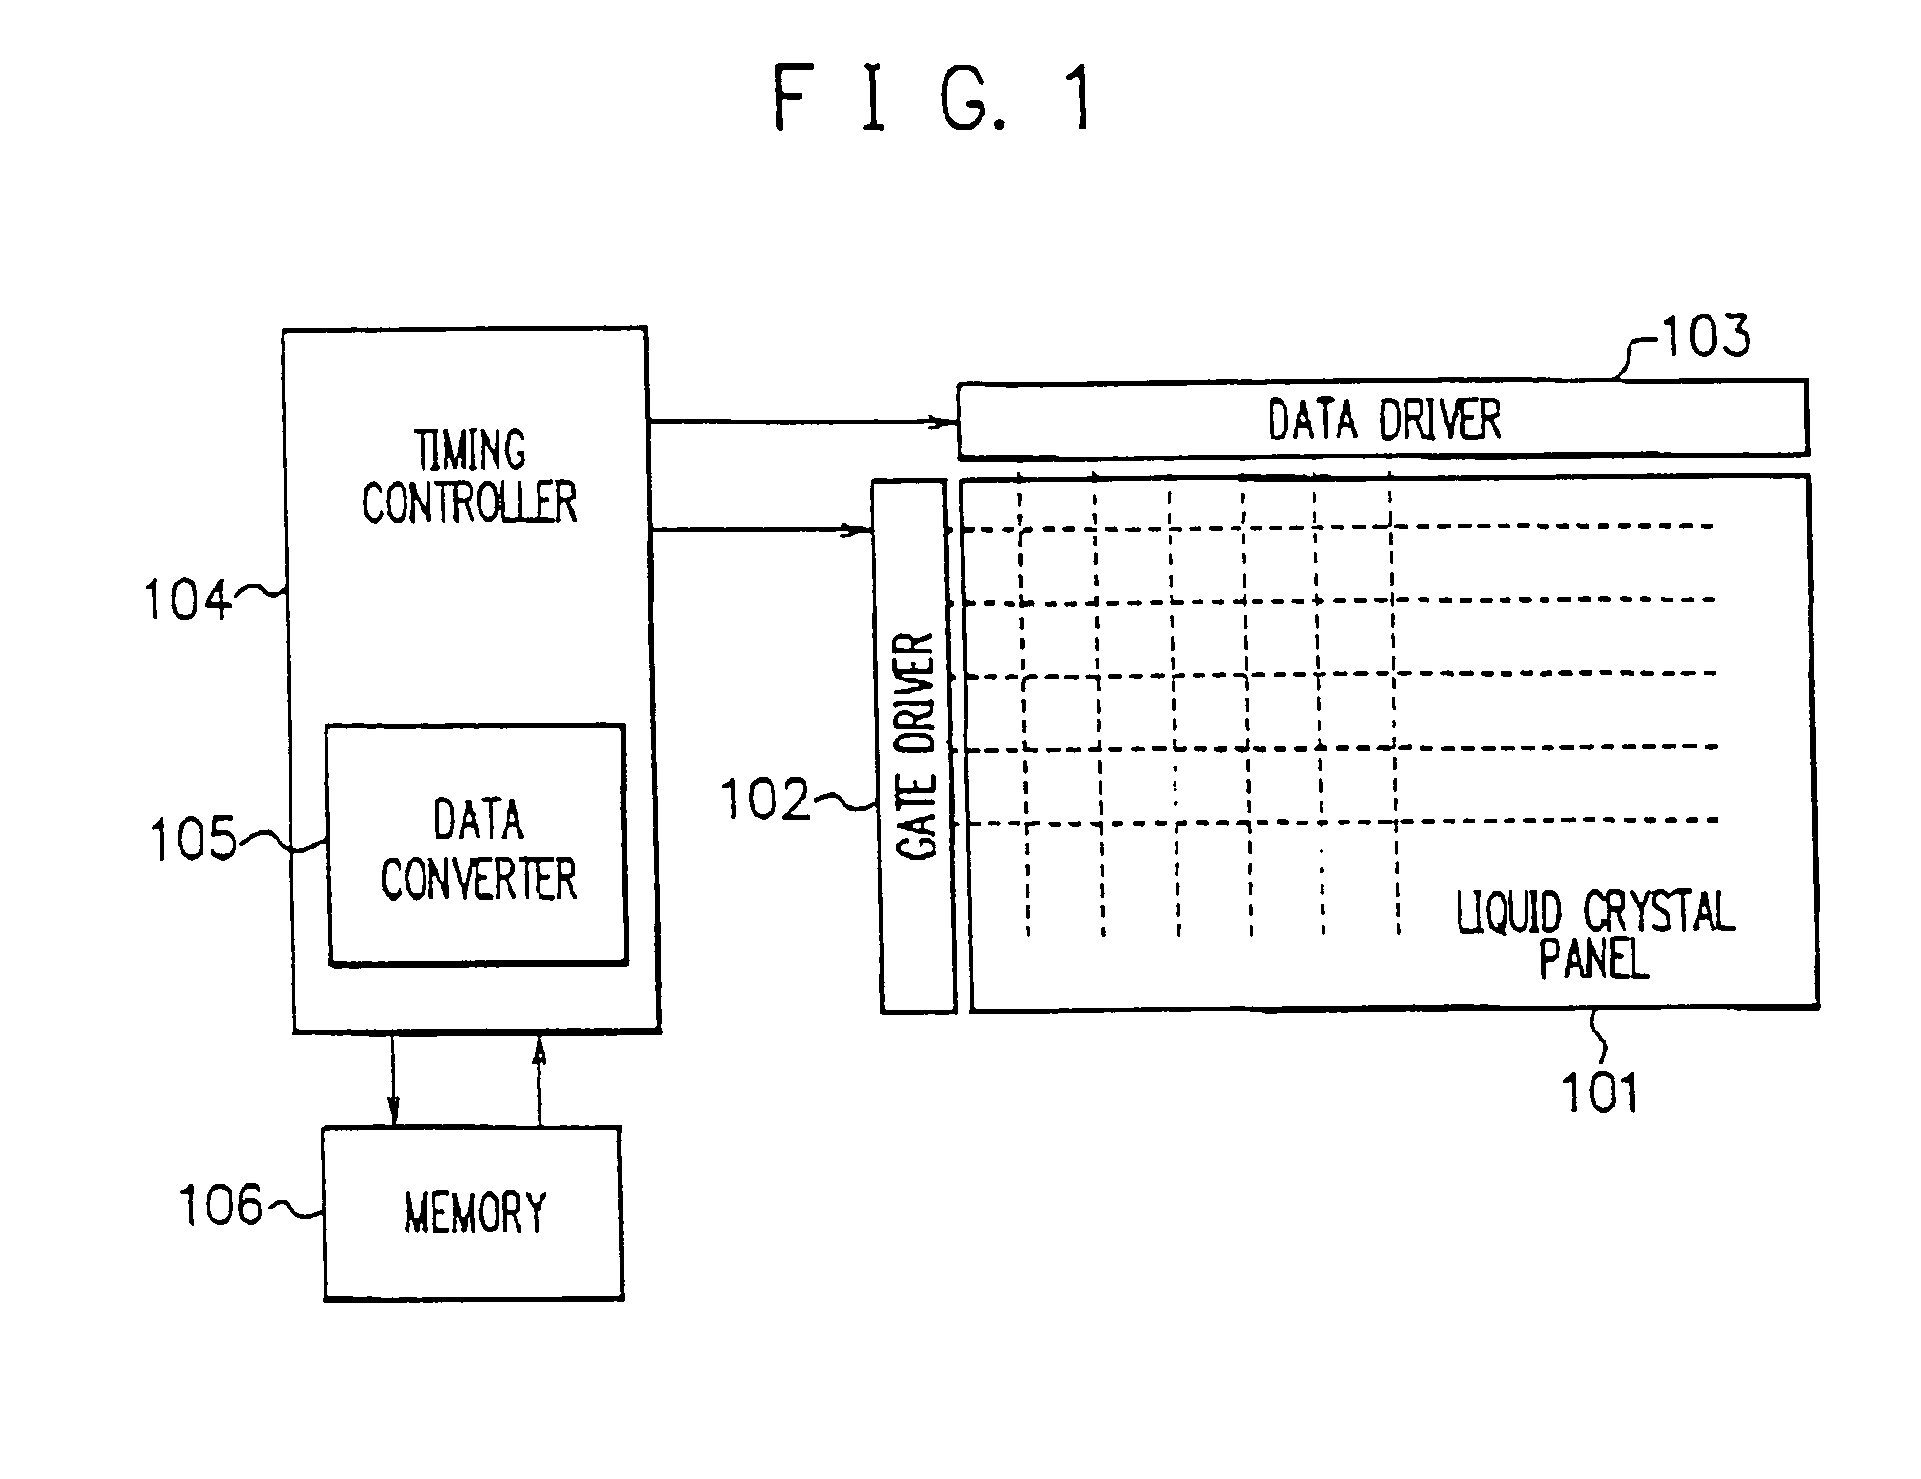 Liquid crystal display device having a plurality of subfields